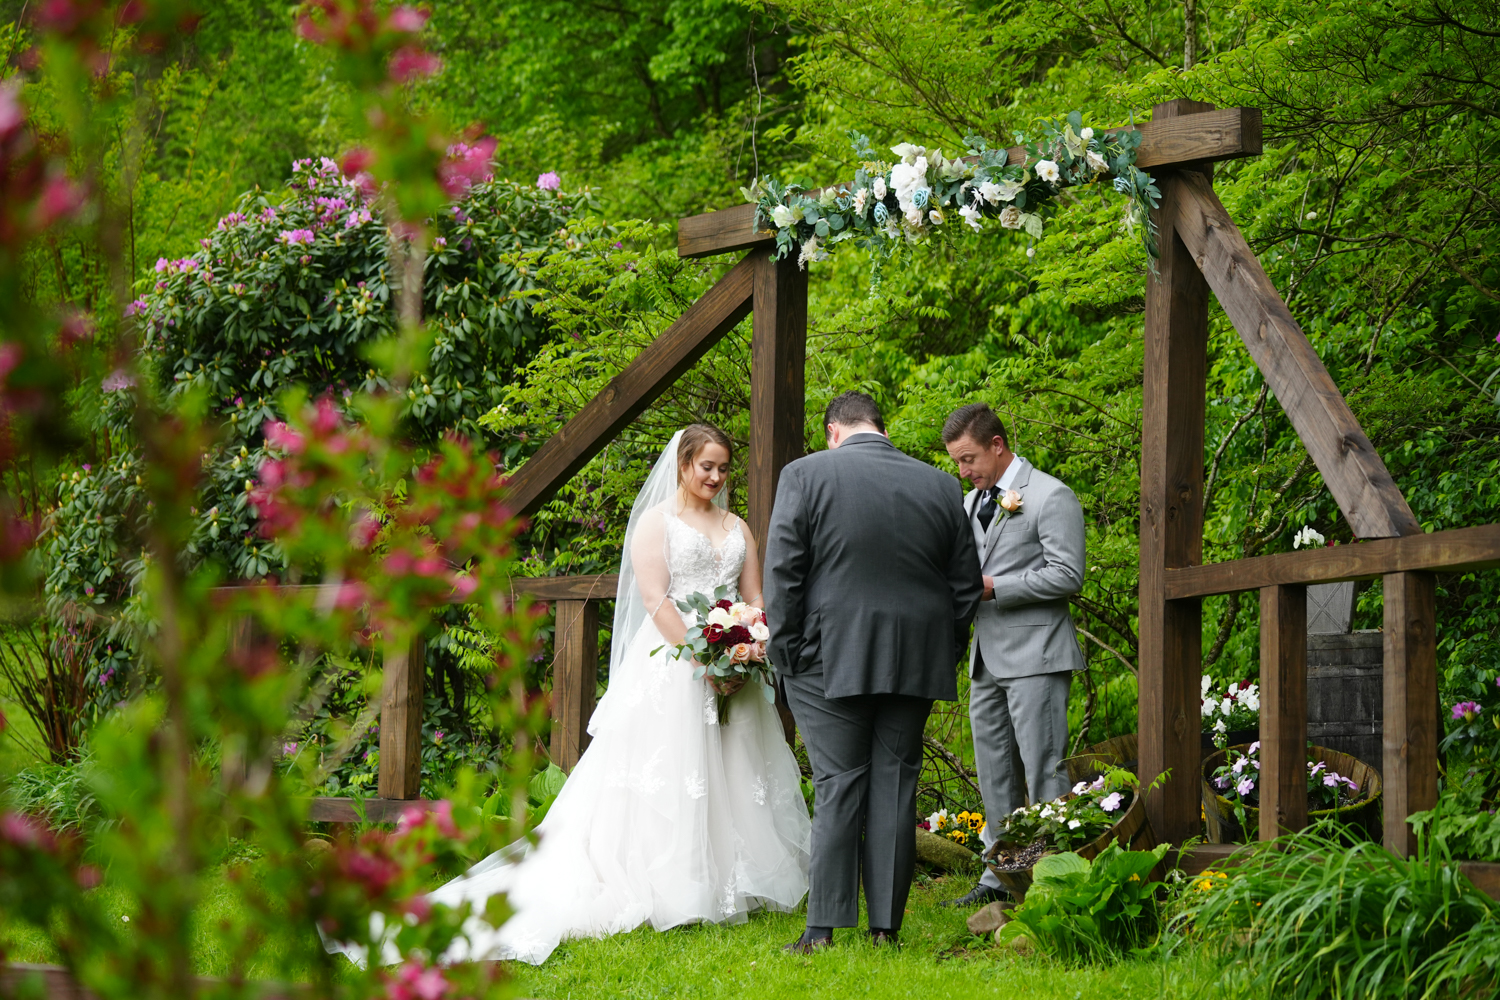 Wedding ceremony at a wooden arbor in the spring with foliage all around and red flowers in bloom in the foreground